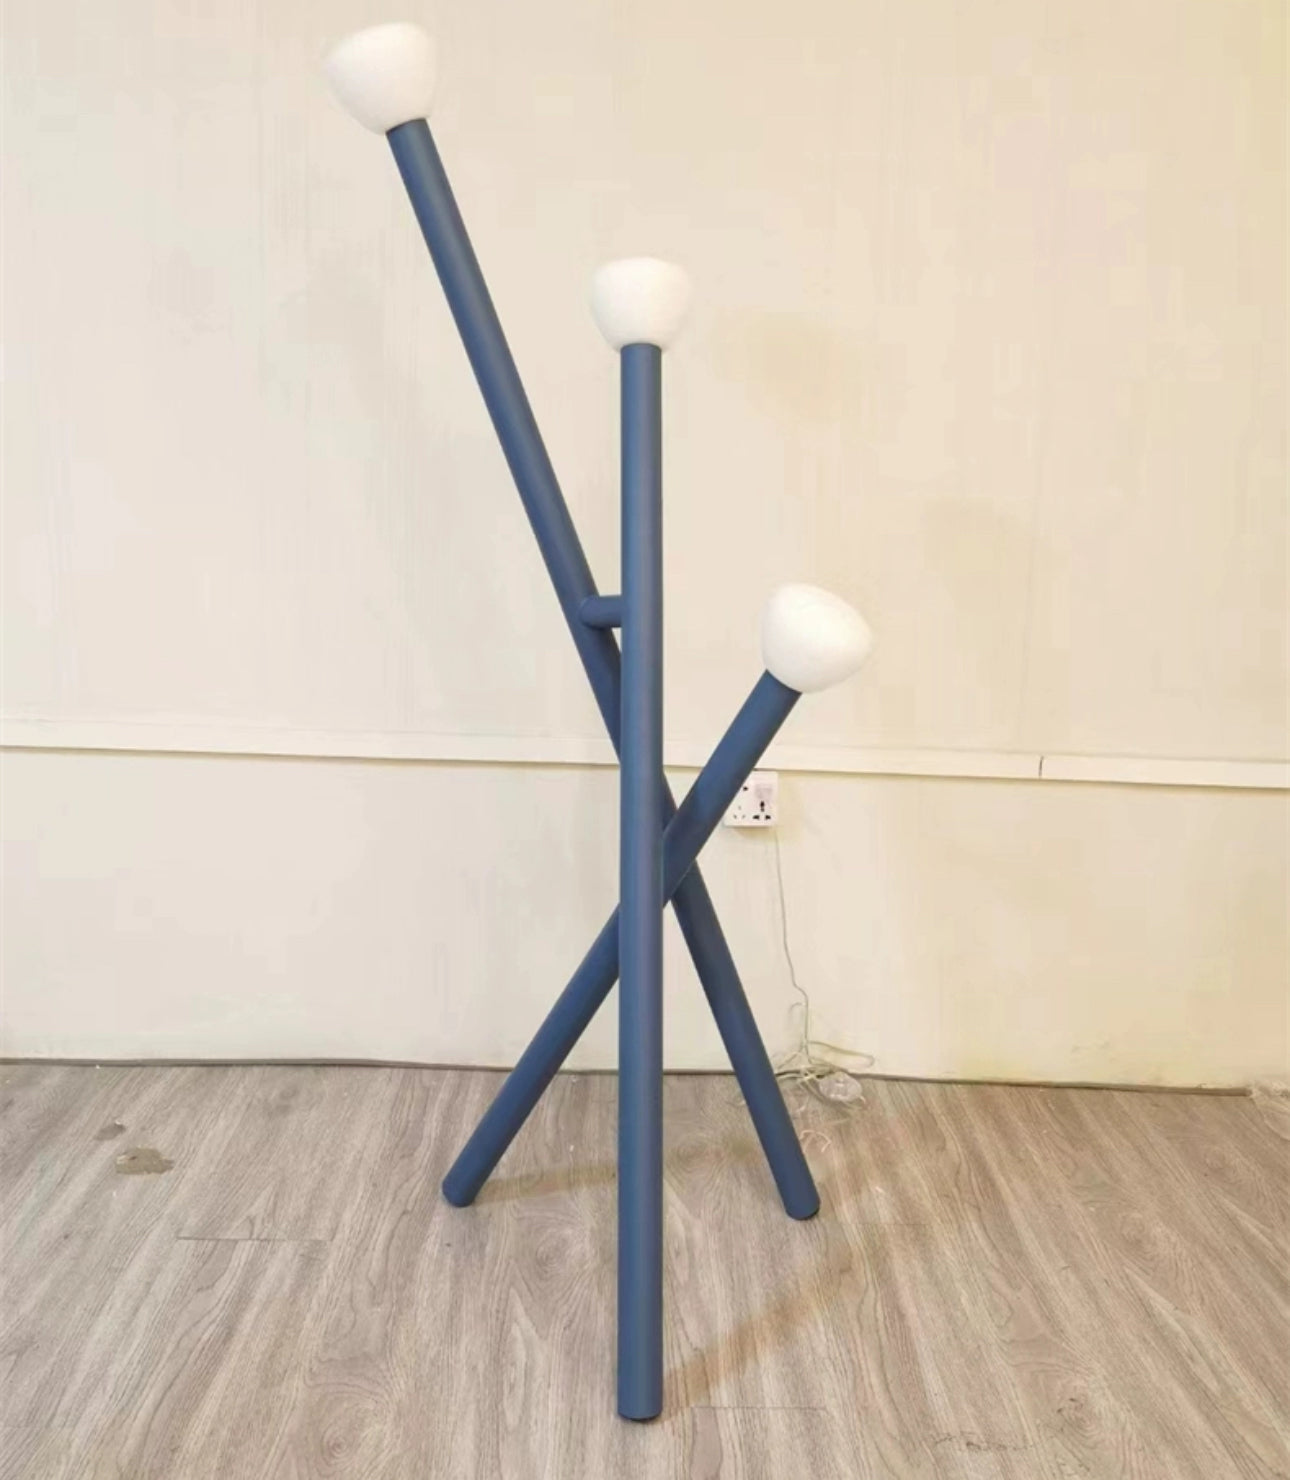 Contemporary Floor Lamp - Modern Tripod Design Frosted Glass Globes 153cm Csa Ul Listed Ce - Lamps